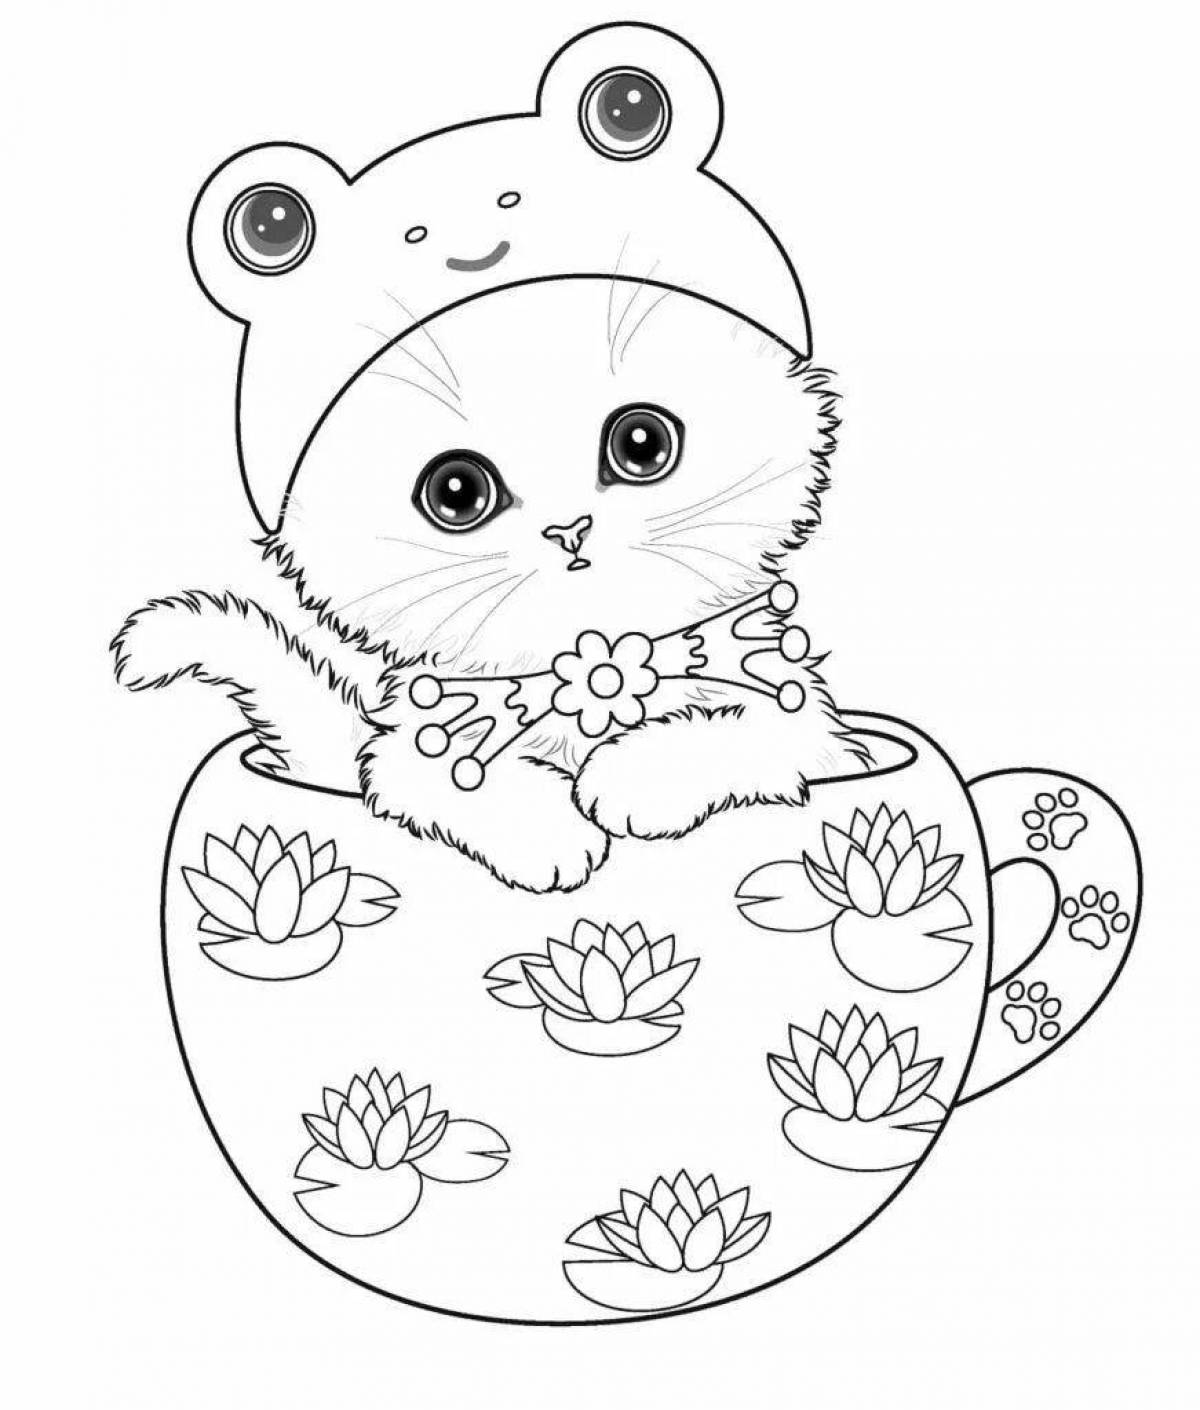 Colorful coloring page year of the cat